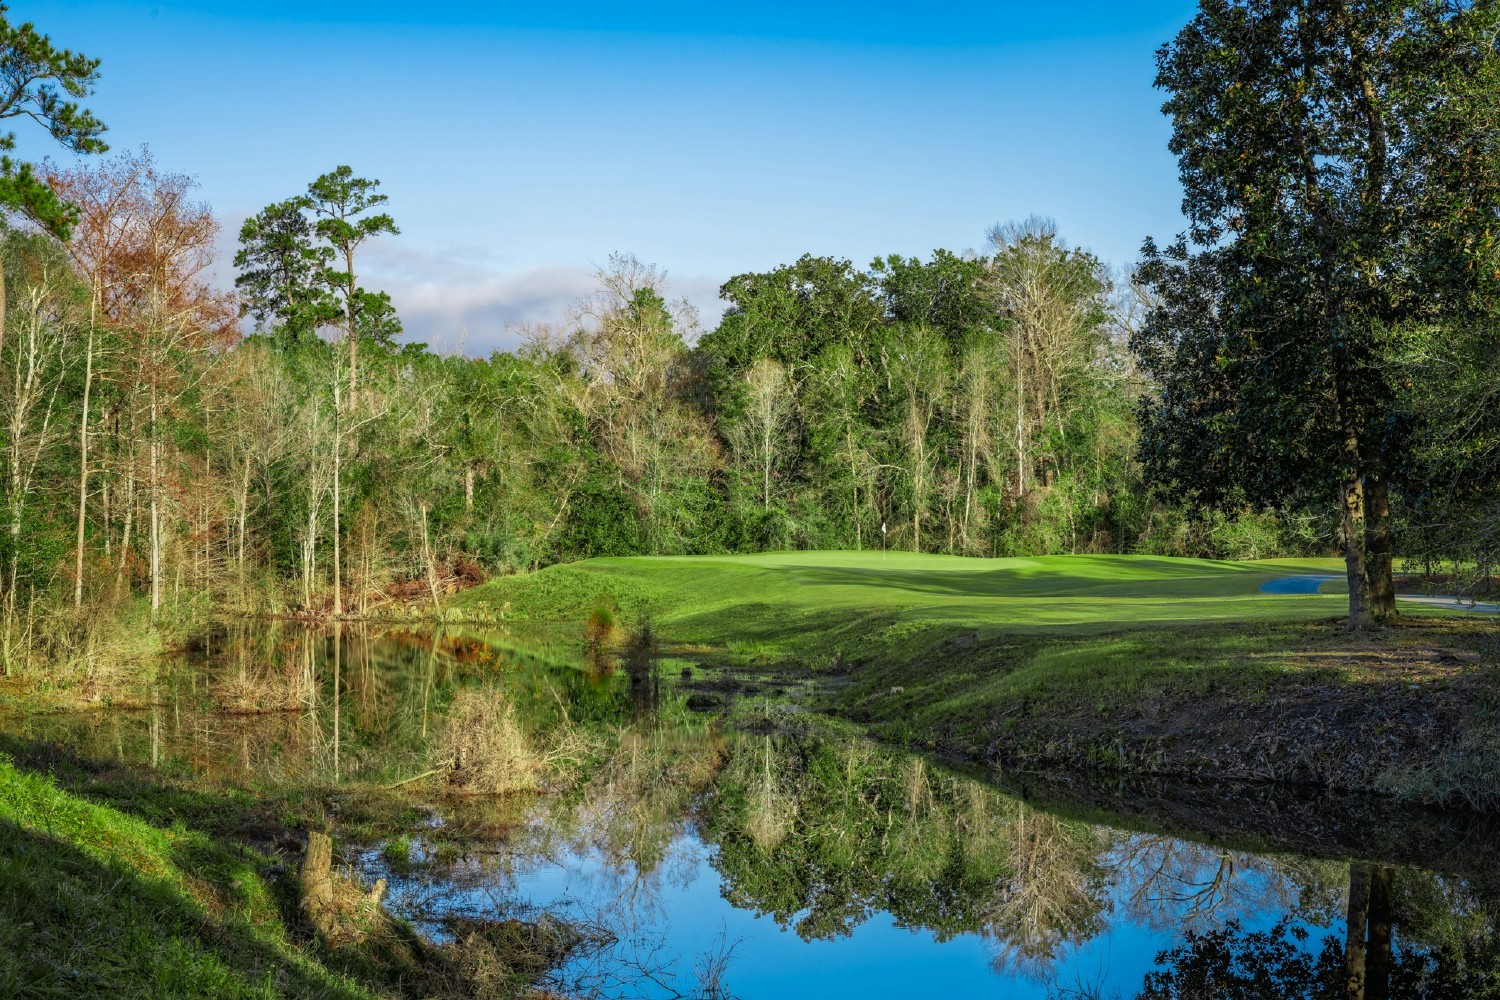 Grand Bear Golf Course offers a private experience where the golfer is alone to enjoy its pristine, natural environment.